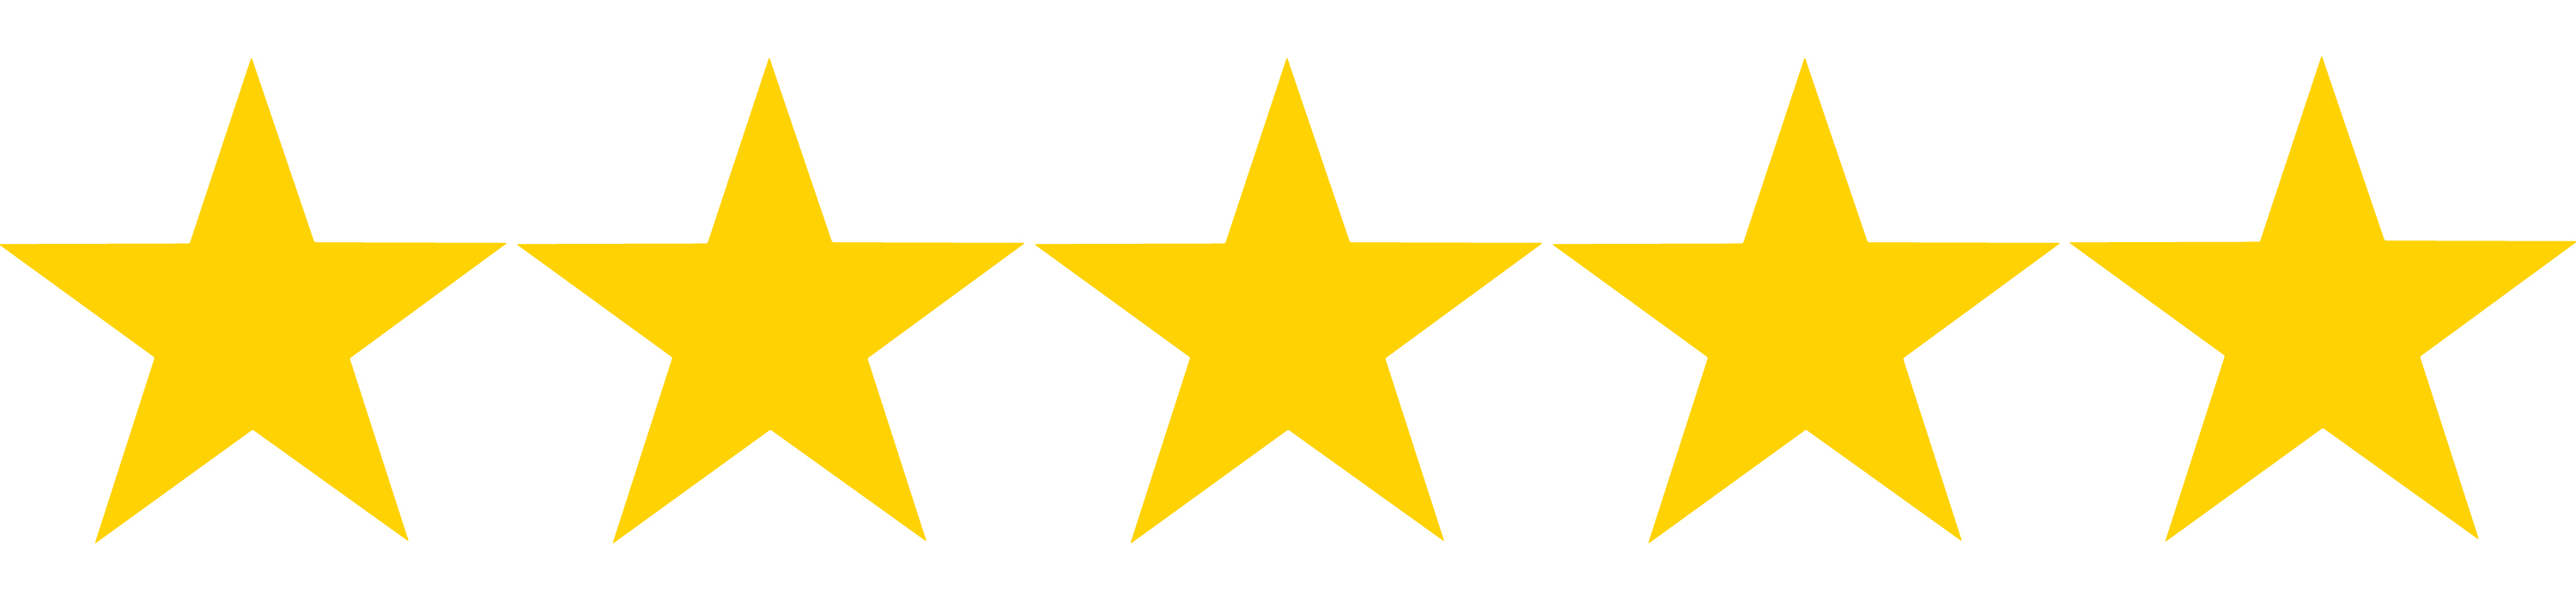 Five Hd Png - 5star, Transparent background PNG HD thumbnail